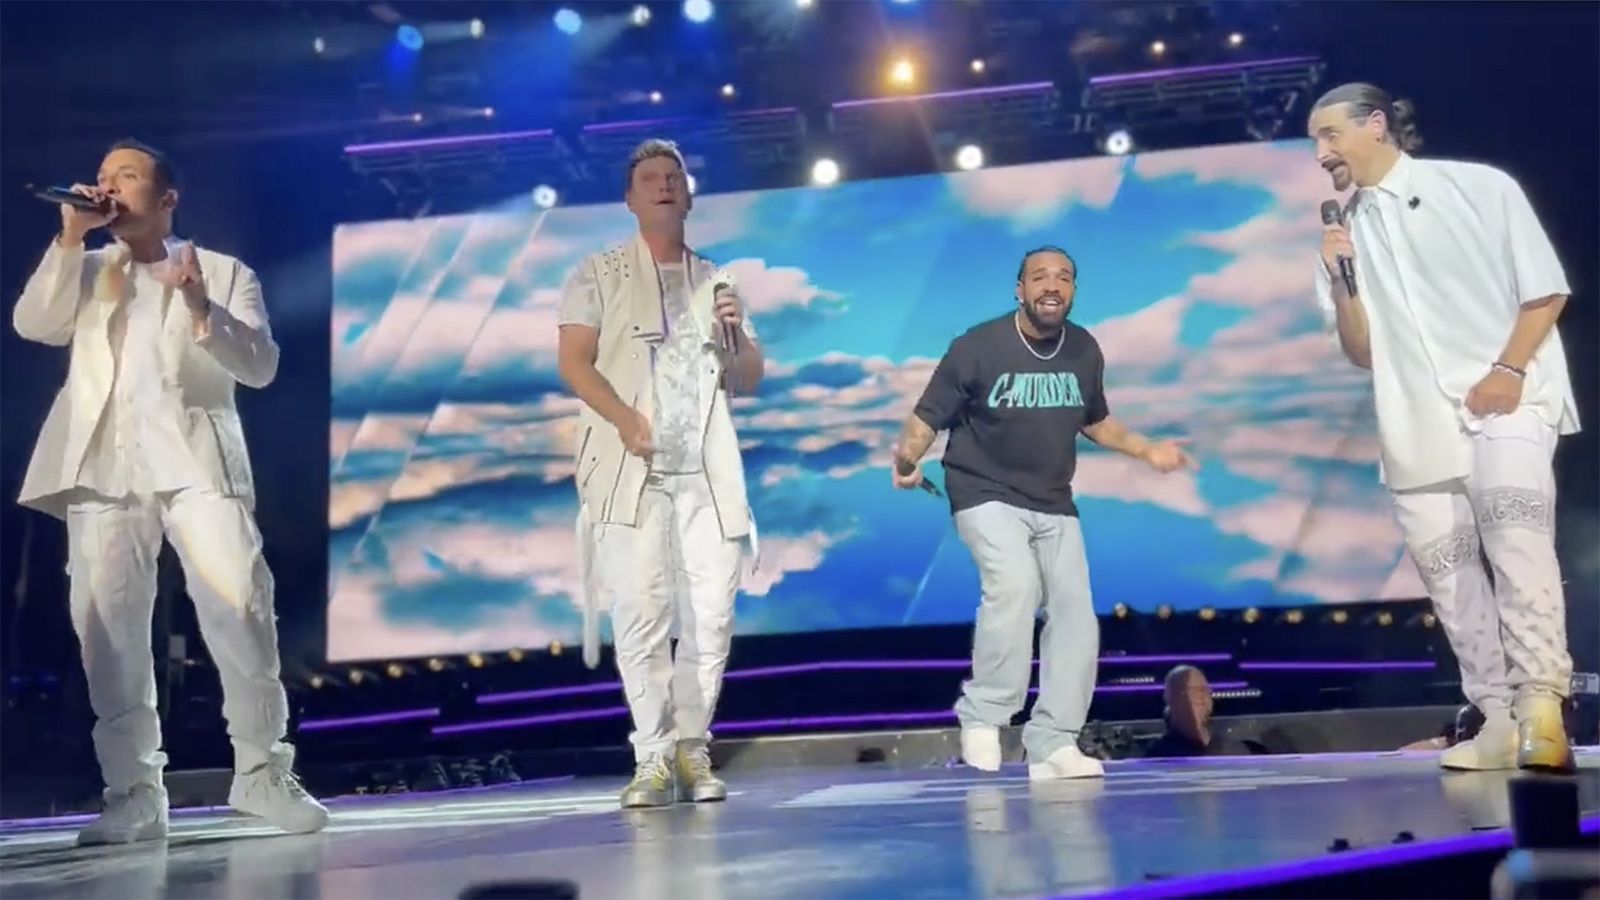 Backstreet Boys Finally Confirm The Most Famous Legend About Them